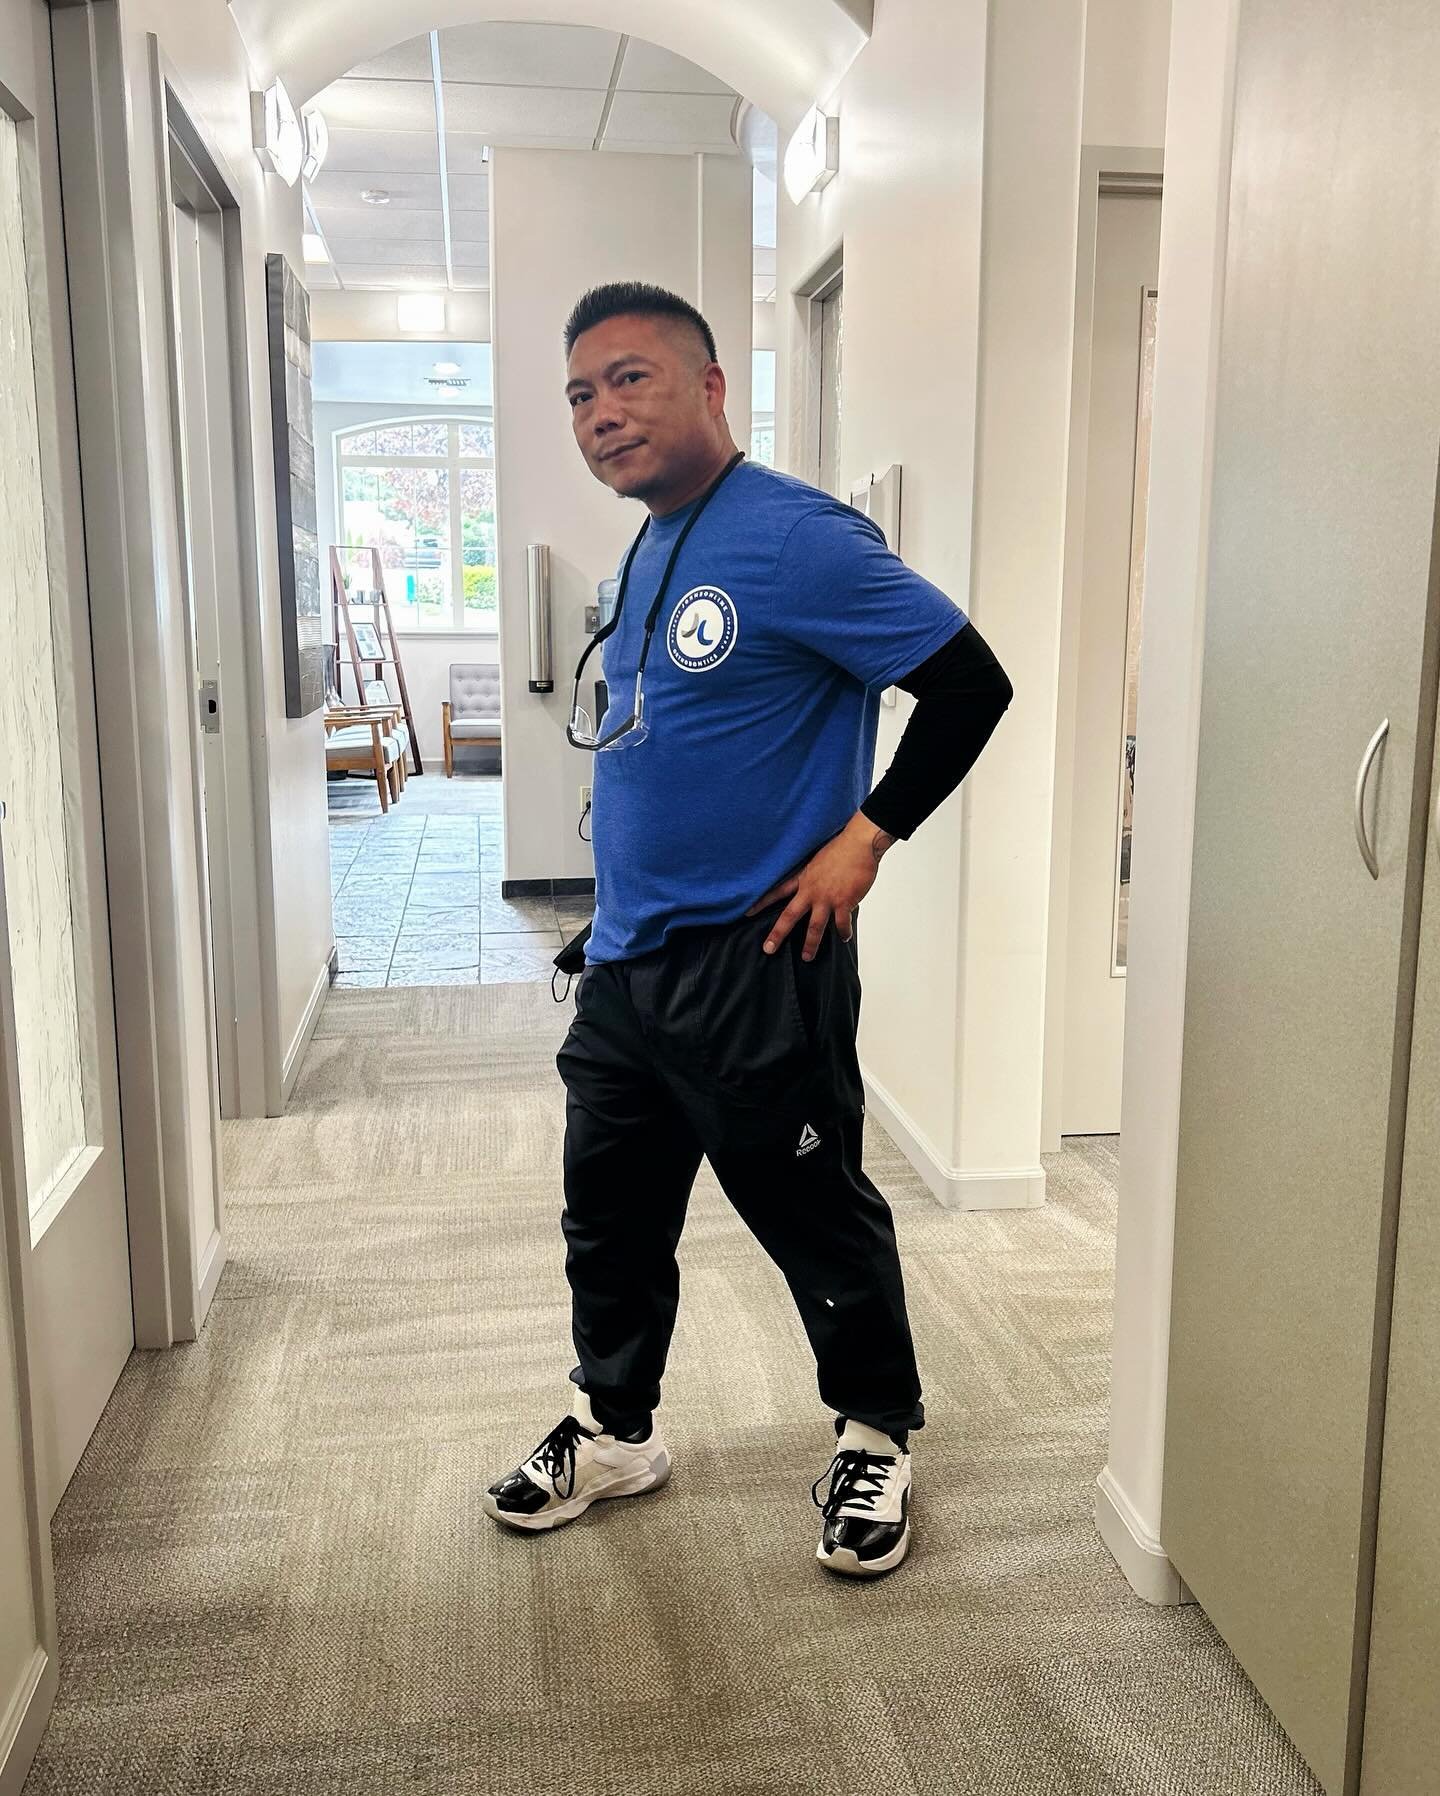 Us: Grande let us get a picture of you for your birthday 

Grande: Okay *poses* 

Sounds about right 😂🕺🏽 
Let&rsquo;s all wish Grande a HAPPY BIRTHDAY 🎉 
&bull;
&bull;
&bull;

#johnsonlinkorthodontics #staffappreciationpost #orthodontist #celebra